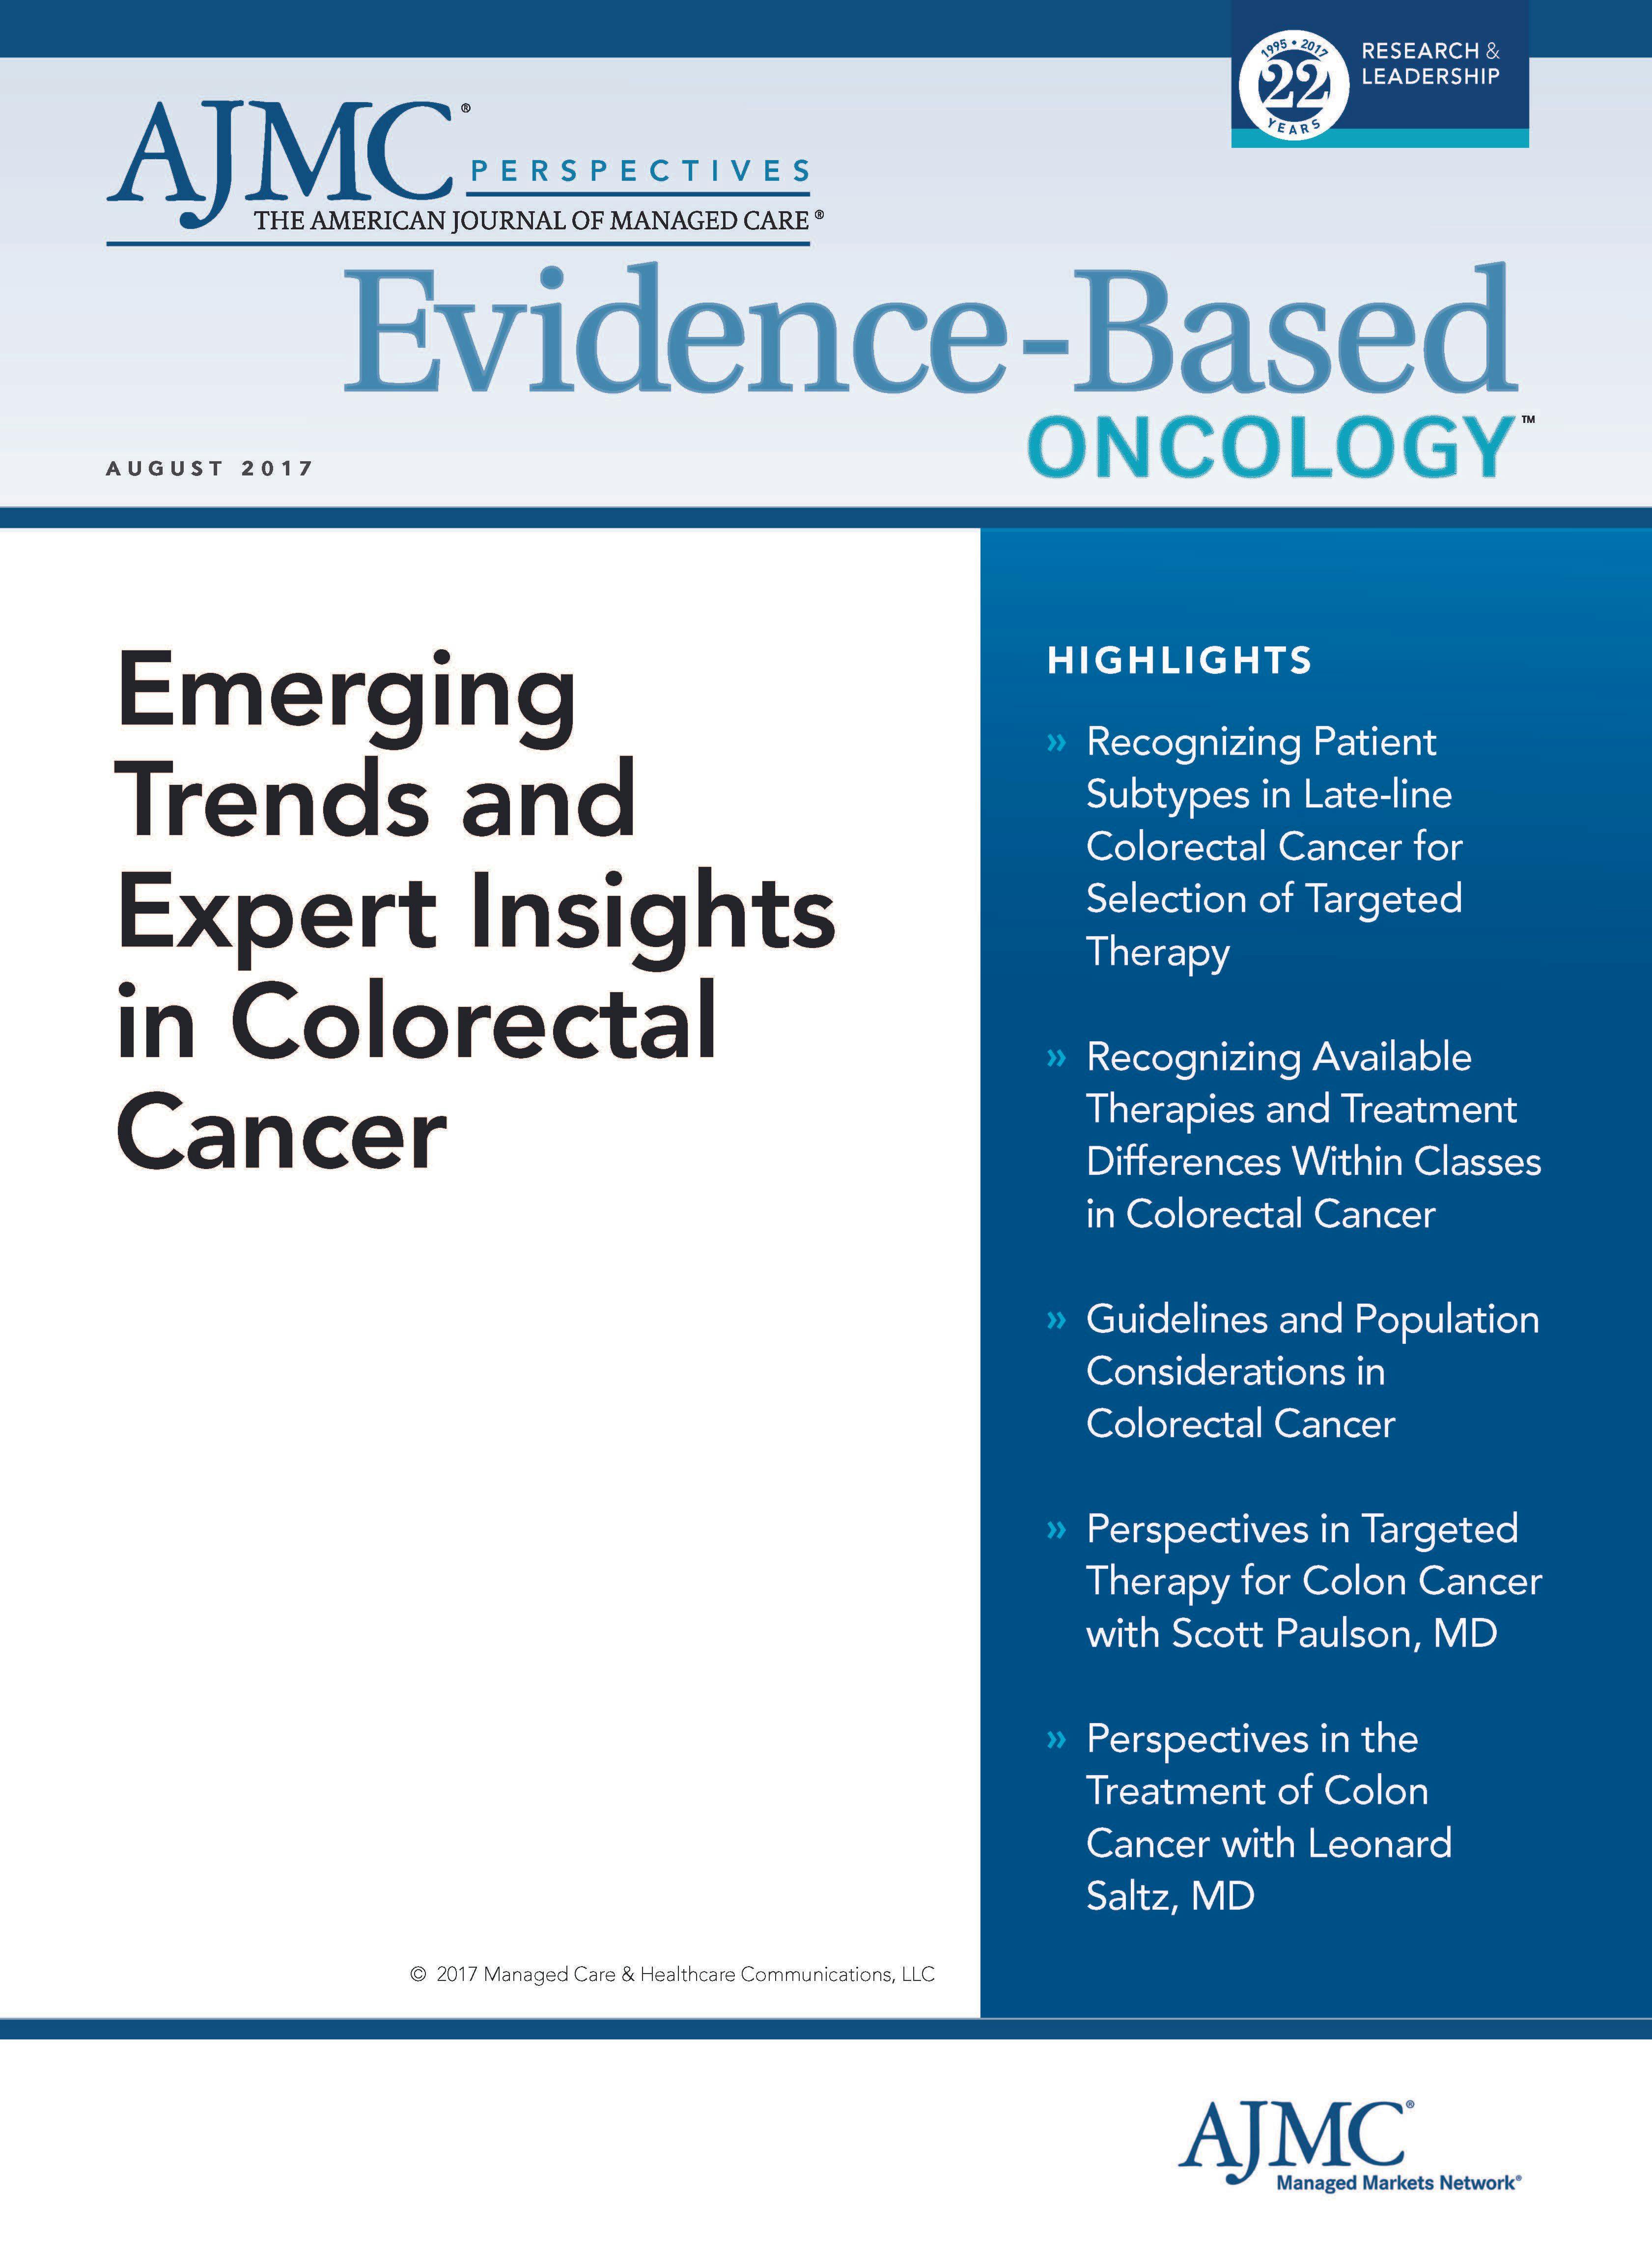 Emerging Trends and Expert Insights in Colorectal Cancer